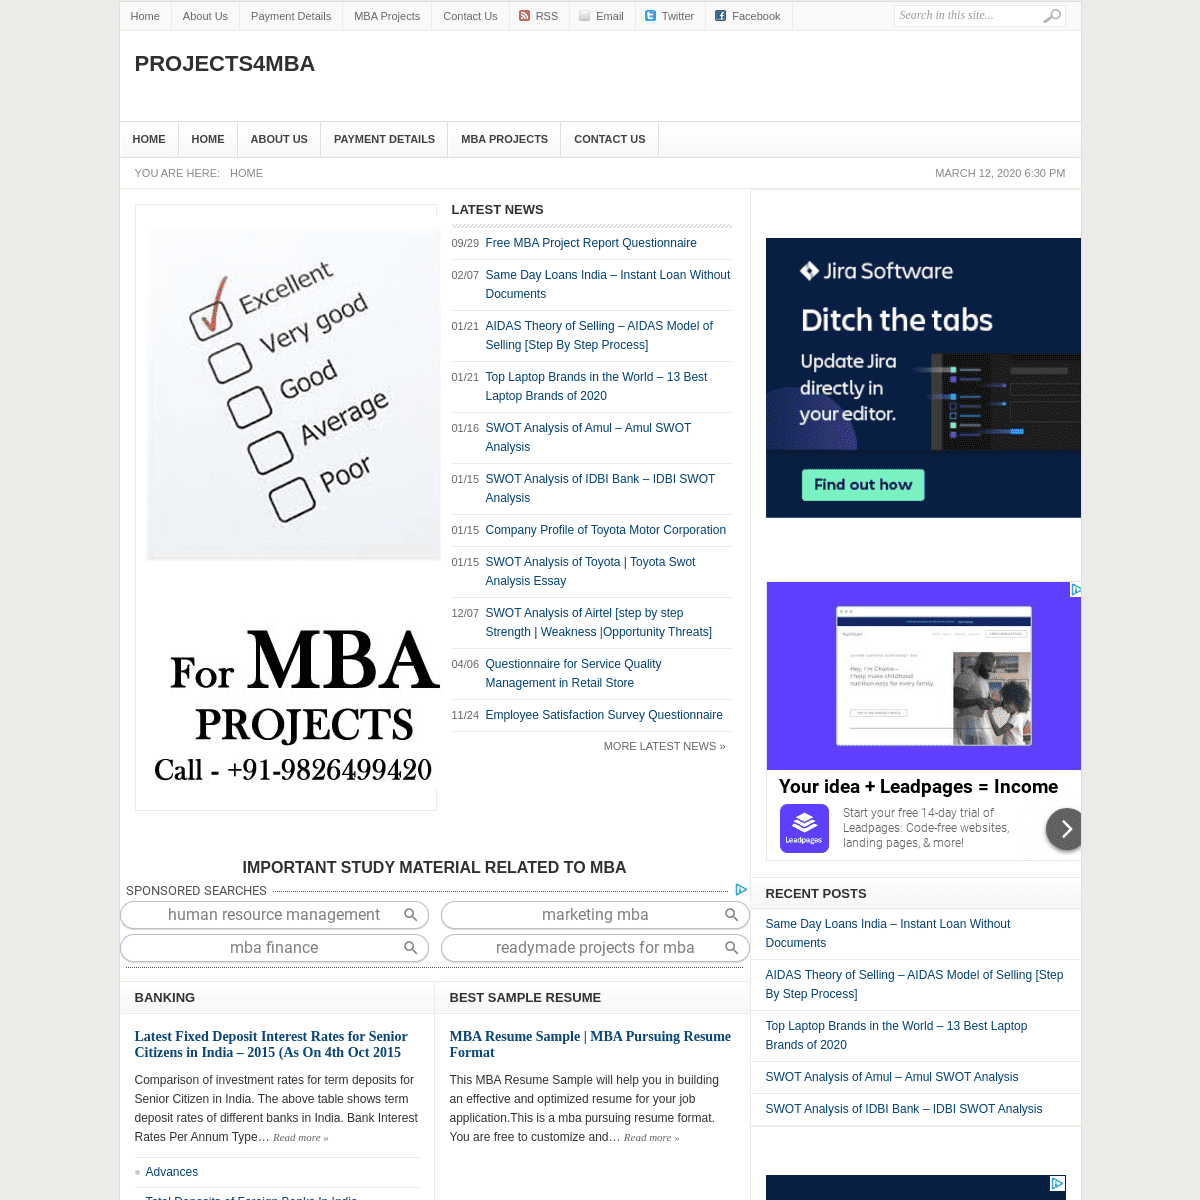 A complete backup of projects4mba.com